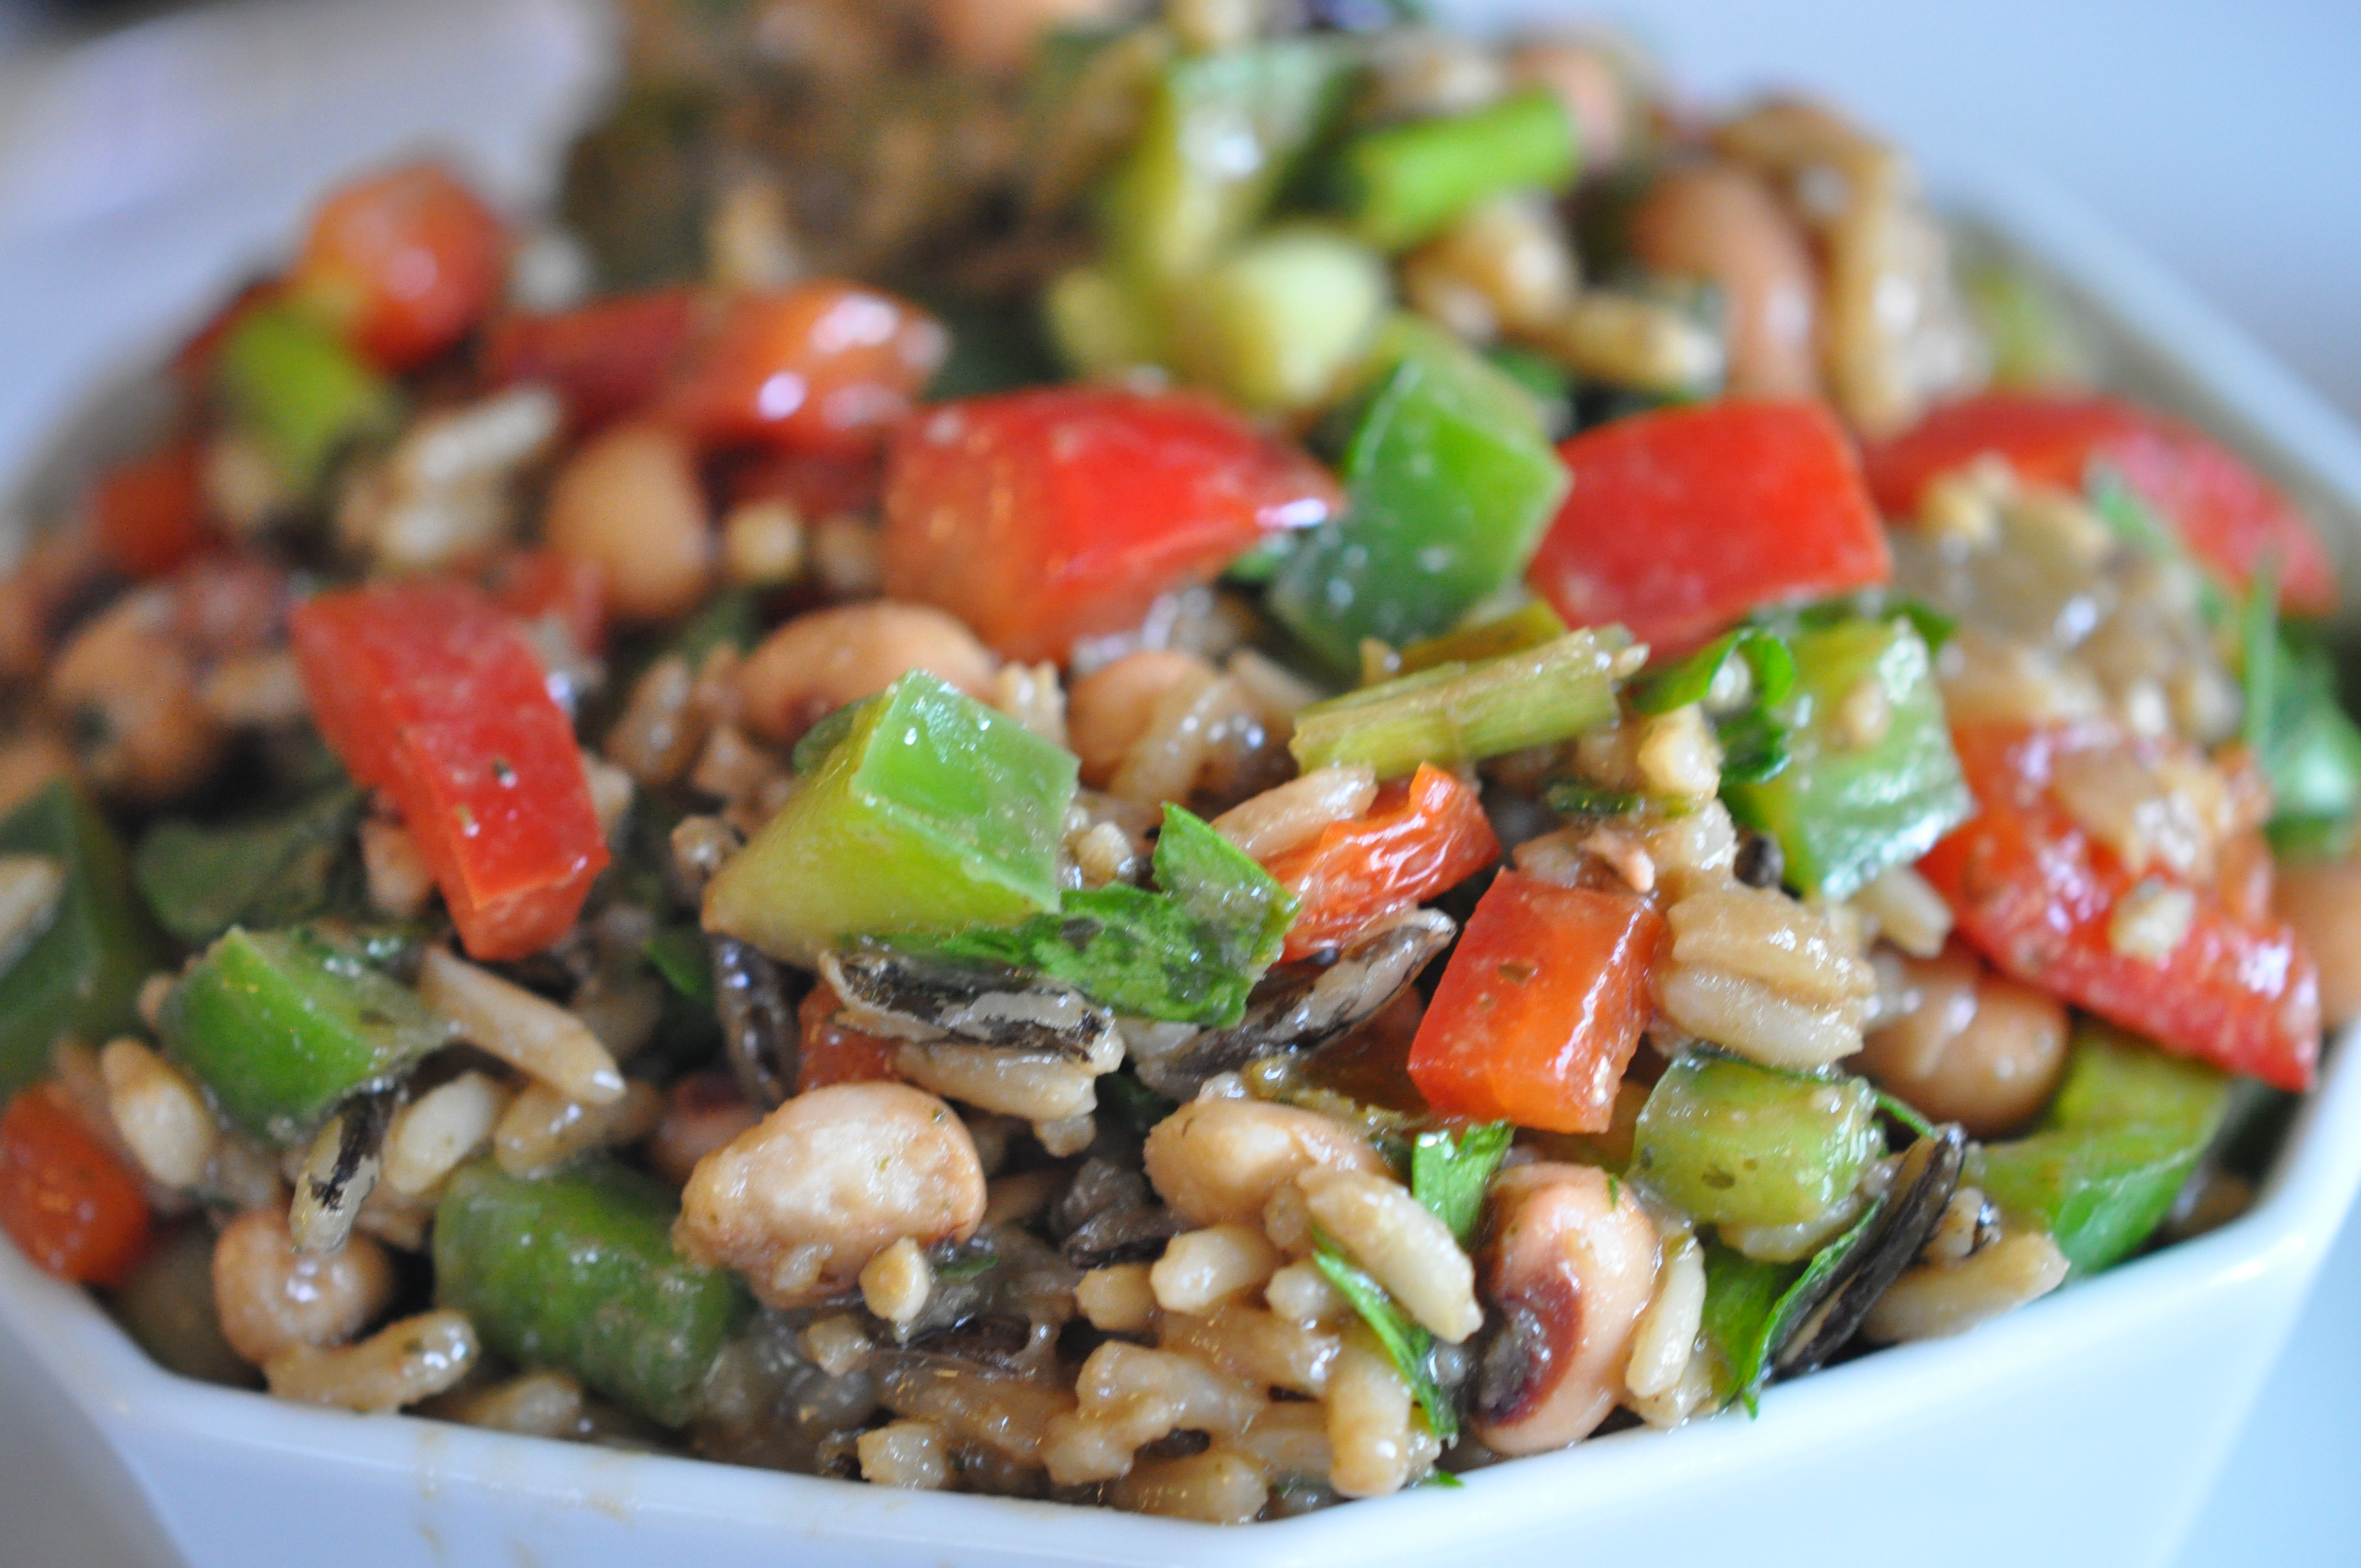 New Year Dinner Traditions with Black Eyed Pea Salad Recipe